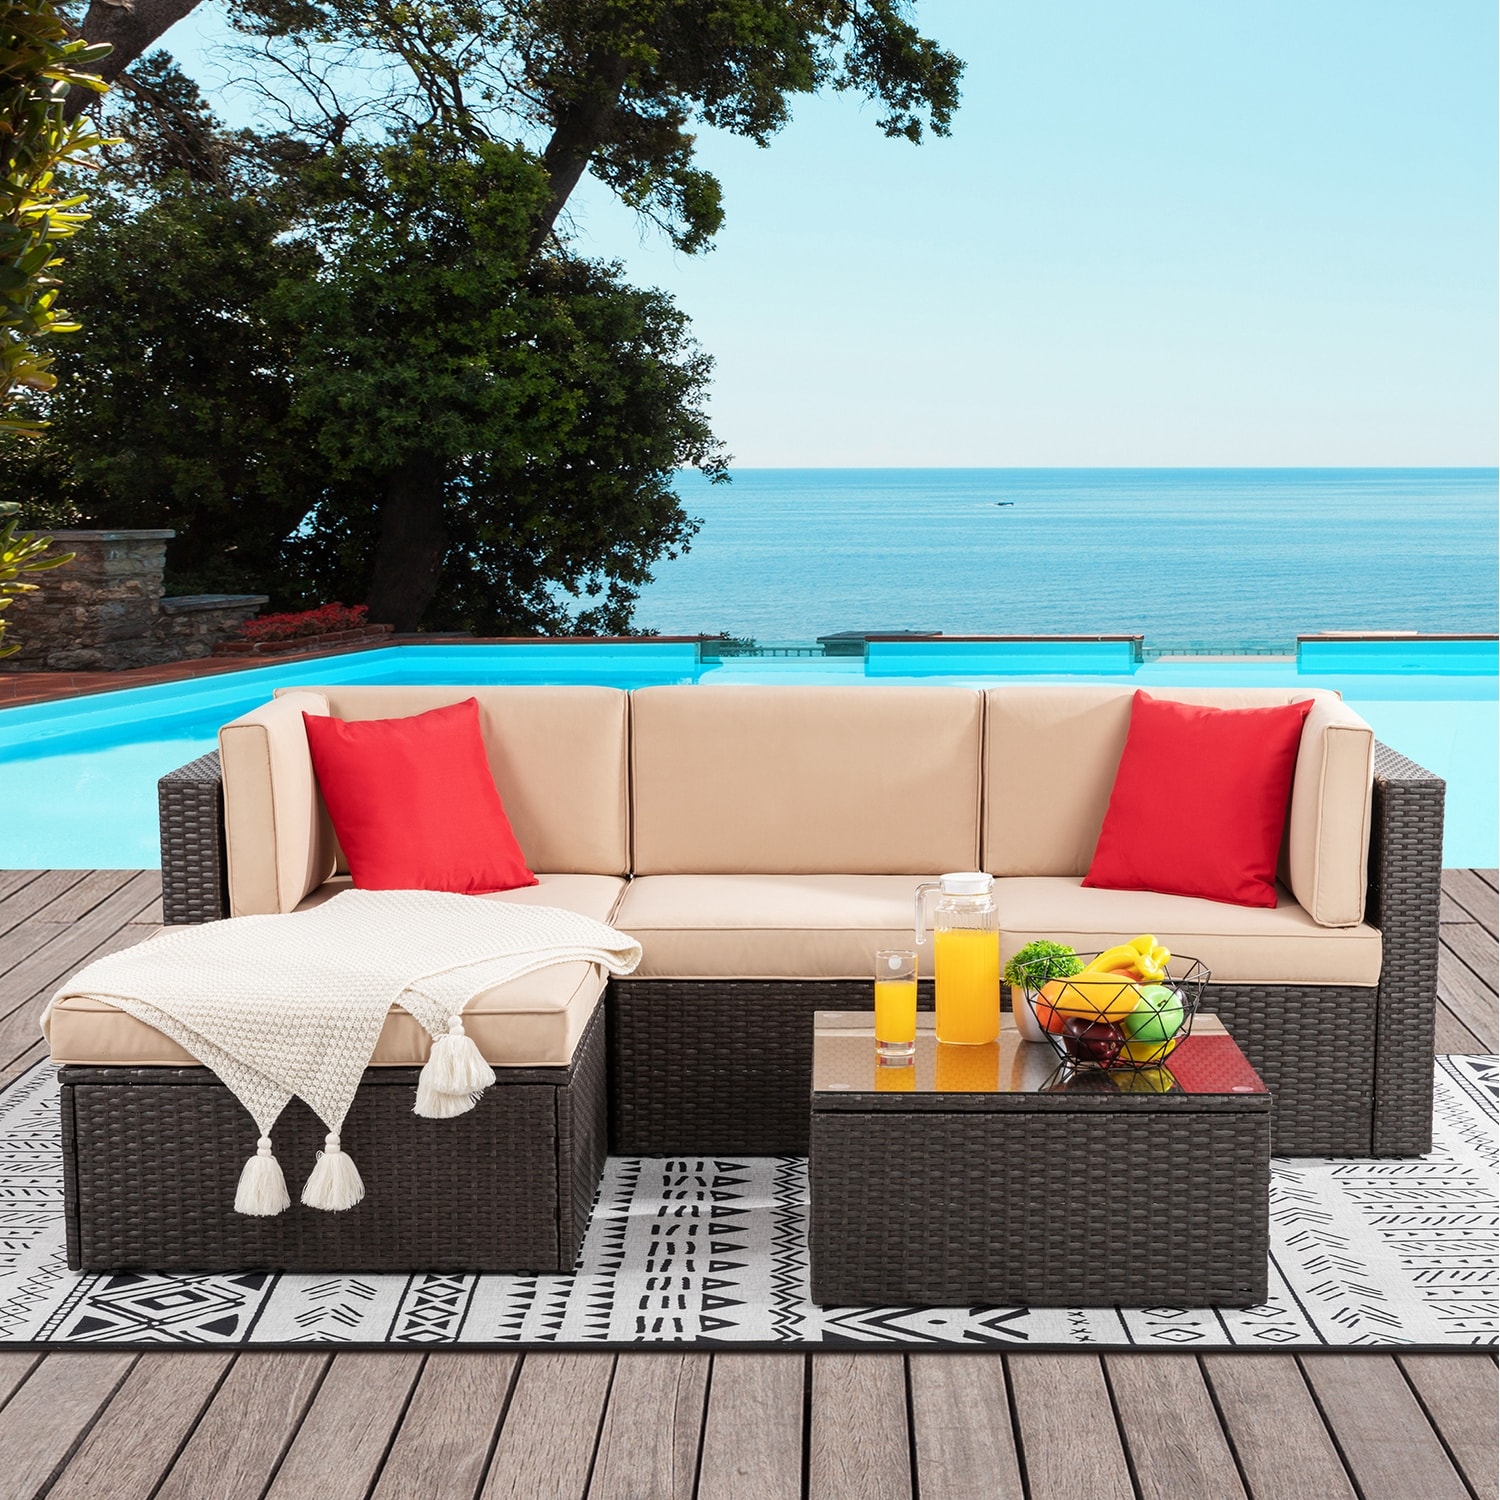 https://ak1.ostkcdn.com/images/products/is/images/direct/0a64ed8440d739b330c441c4977c202d37f7cff2/Futzca-5-Piece-Outdoor-Patio-Furniture-Set%2C-All-Weather-PE-Wicker-Sectional-Patio-Sofa-Conversation-Set-with-Ottoman-%28Beige%29.jpg